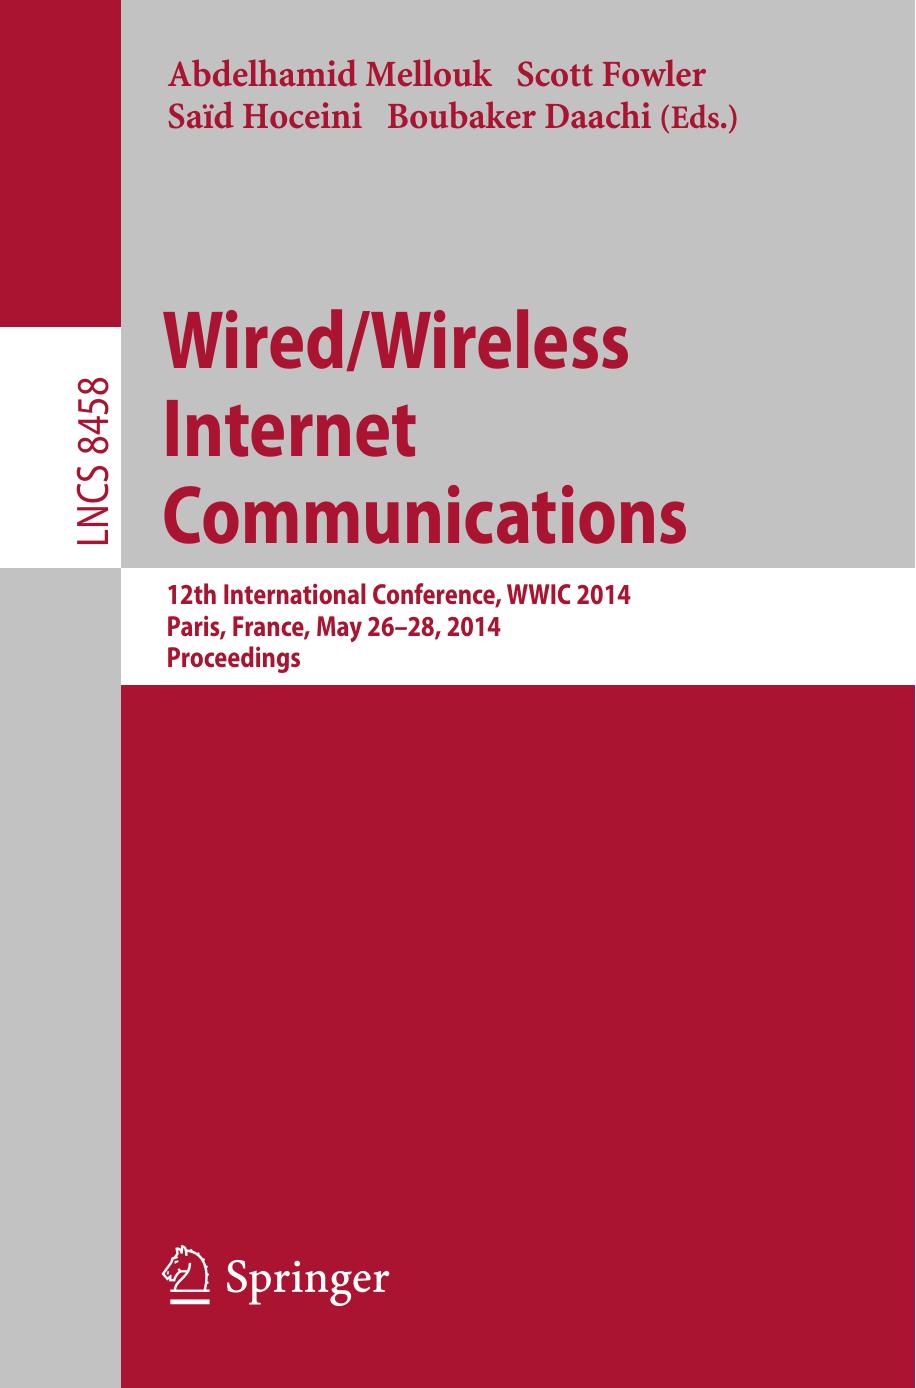 Wired/Wireless Internet Communications: 12th International Conference, WWIC 2014, Paris, France, May 26-28, 2014, Revised Selected Papers